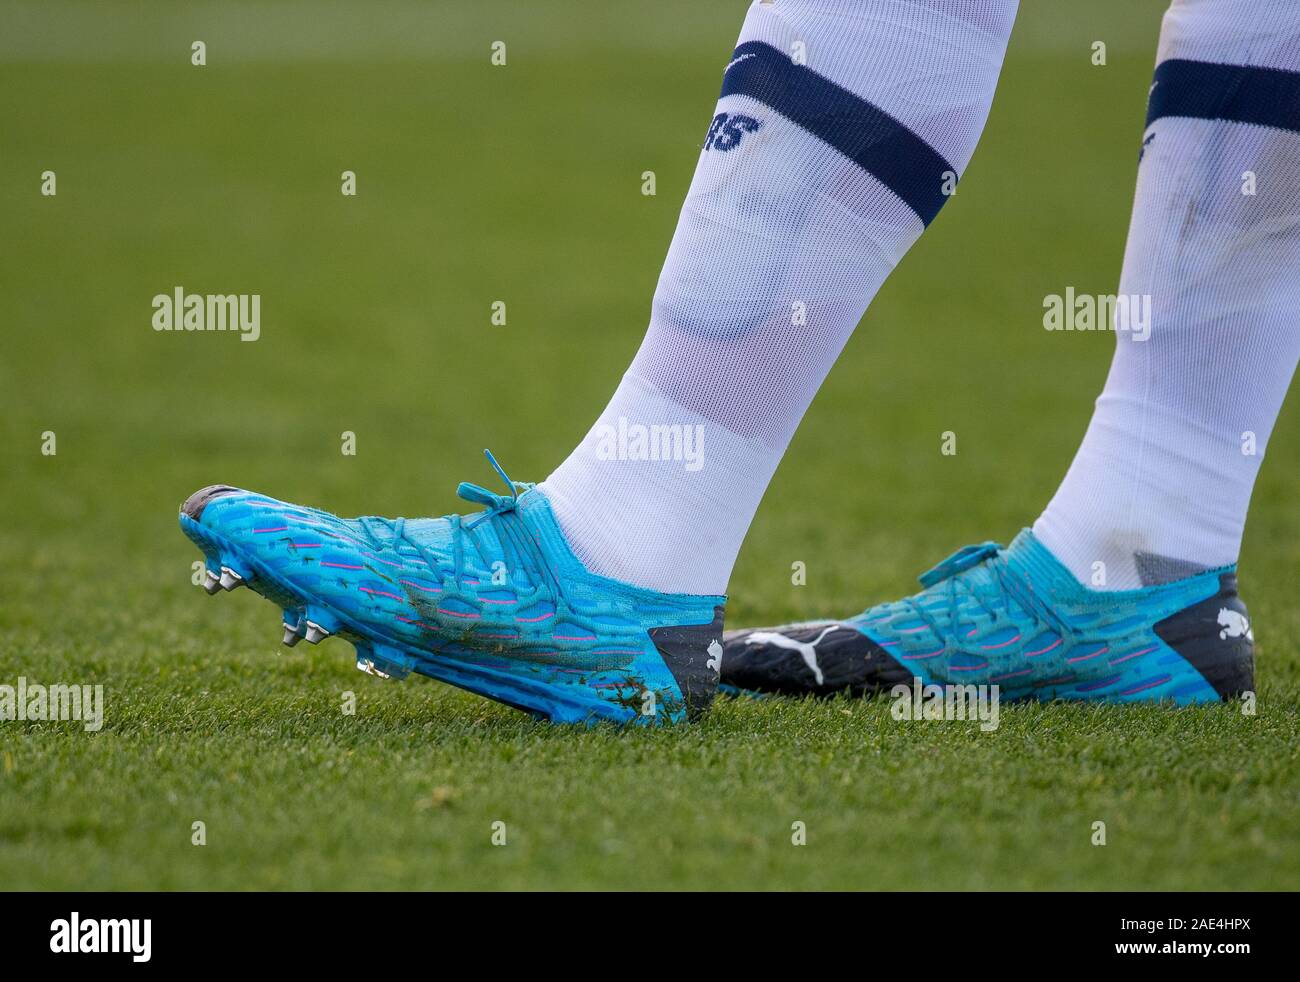 Puma Football Boots High Resolution Stock Photography and Images ...